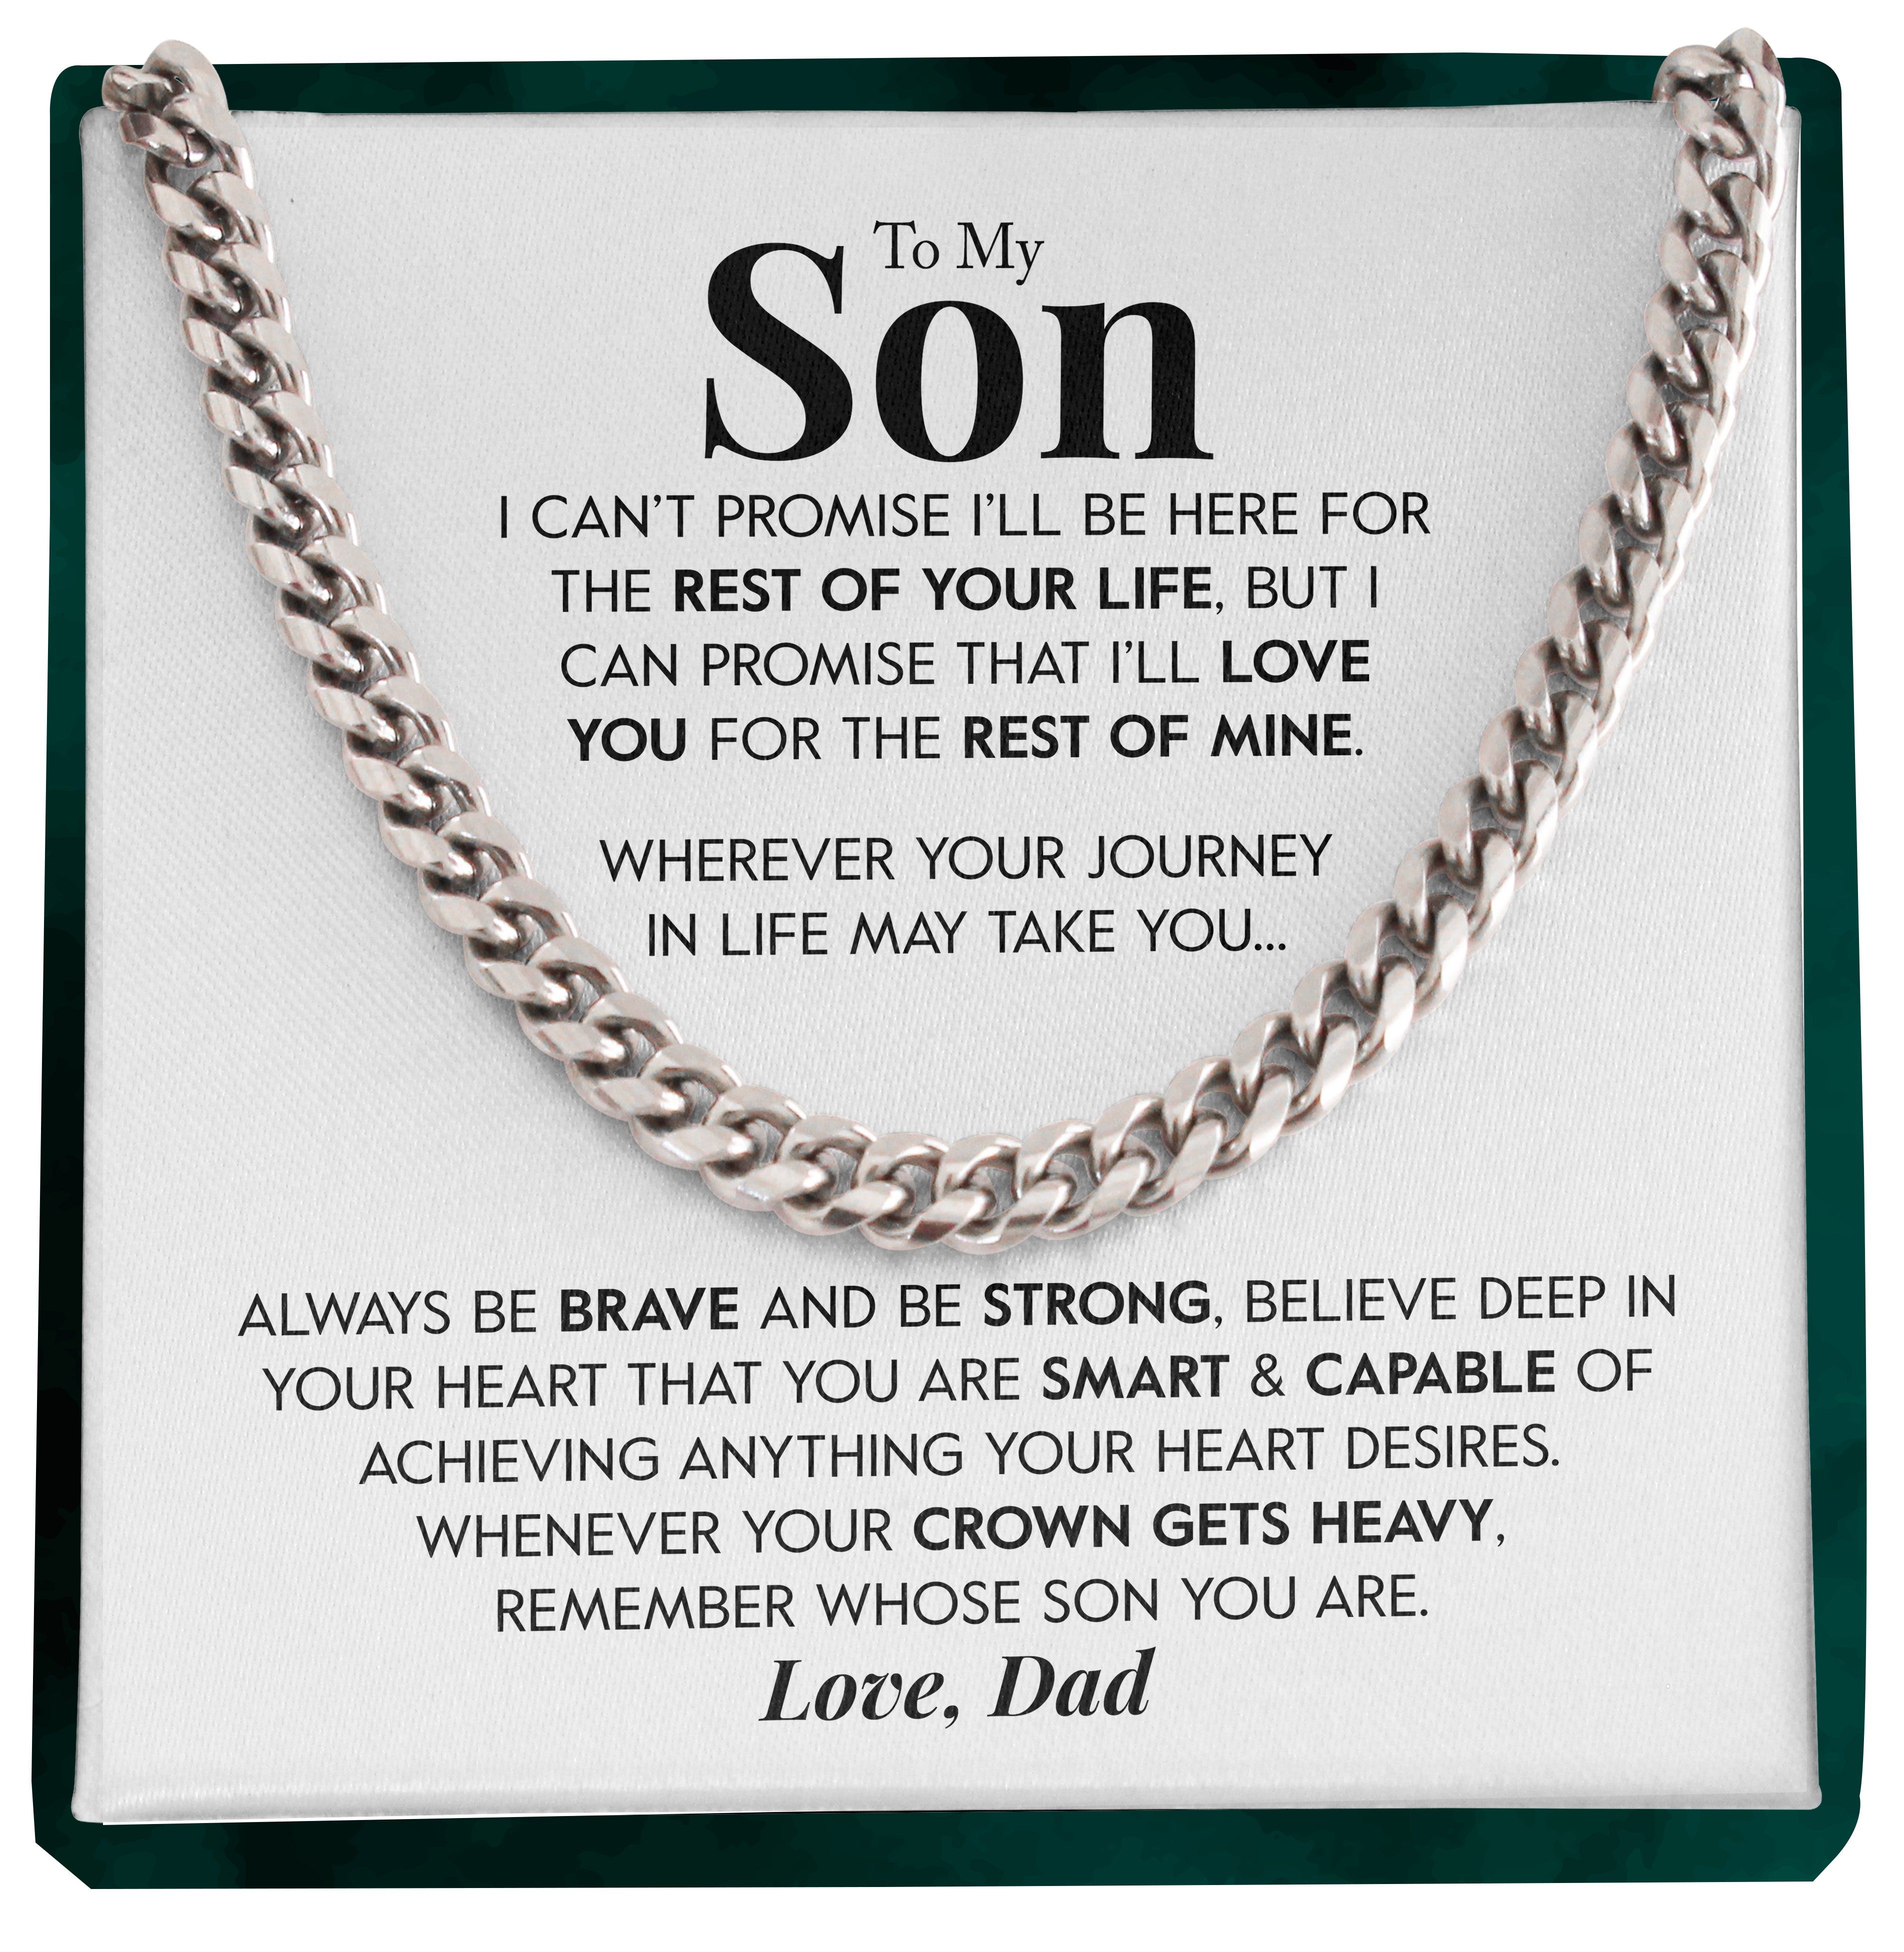 To My Son | "Rest of My Life" | Cuban Neck Chain